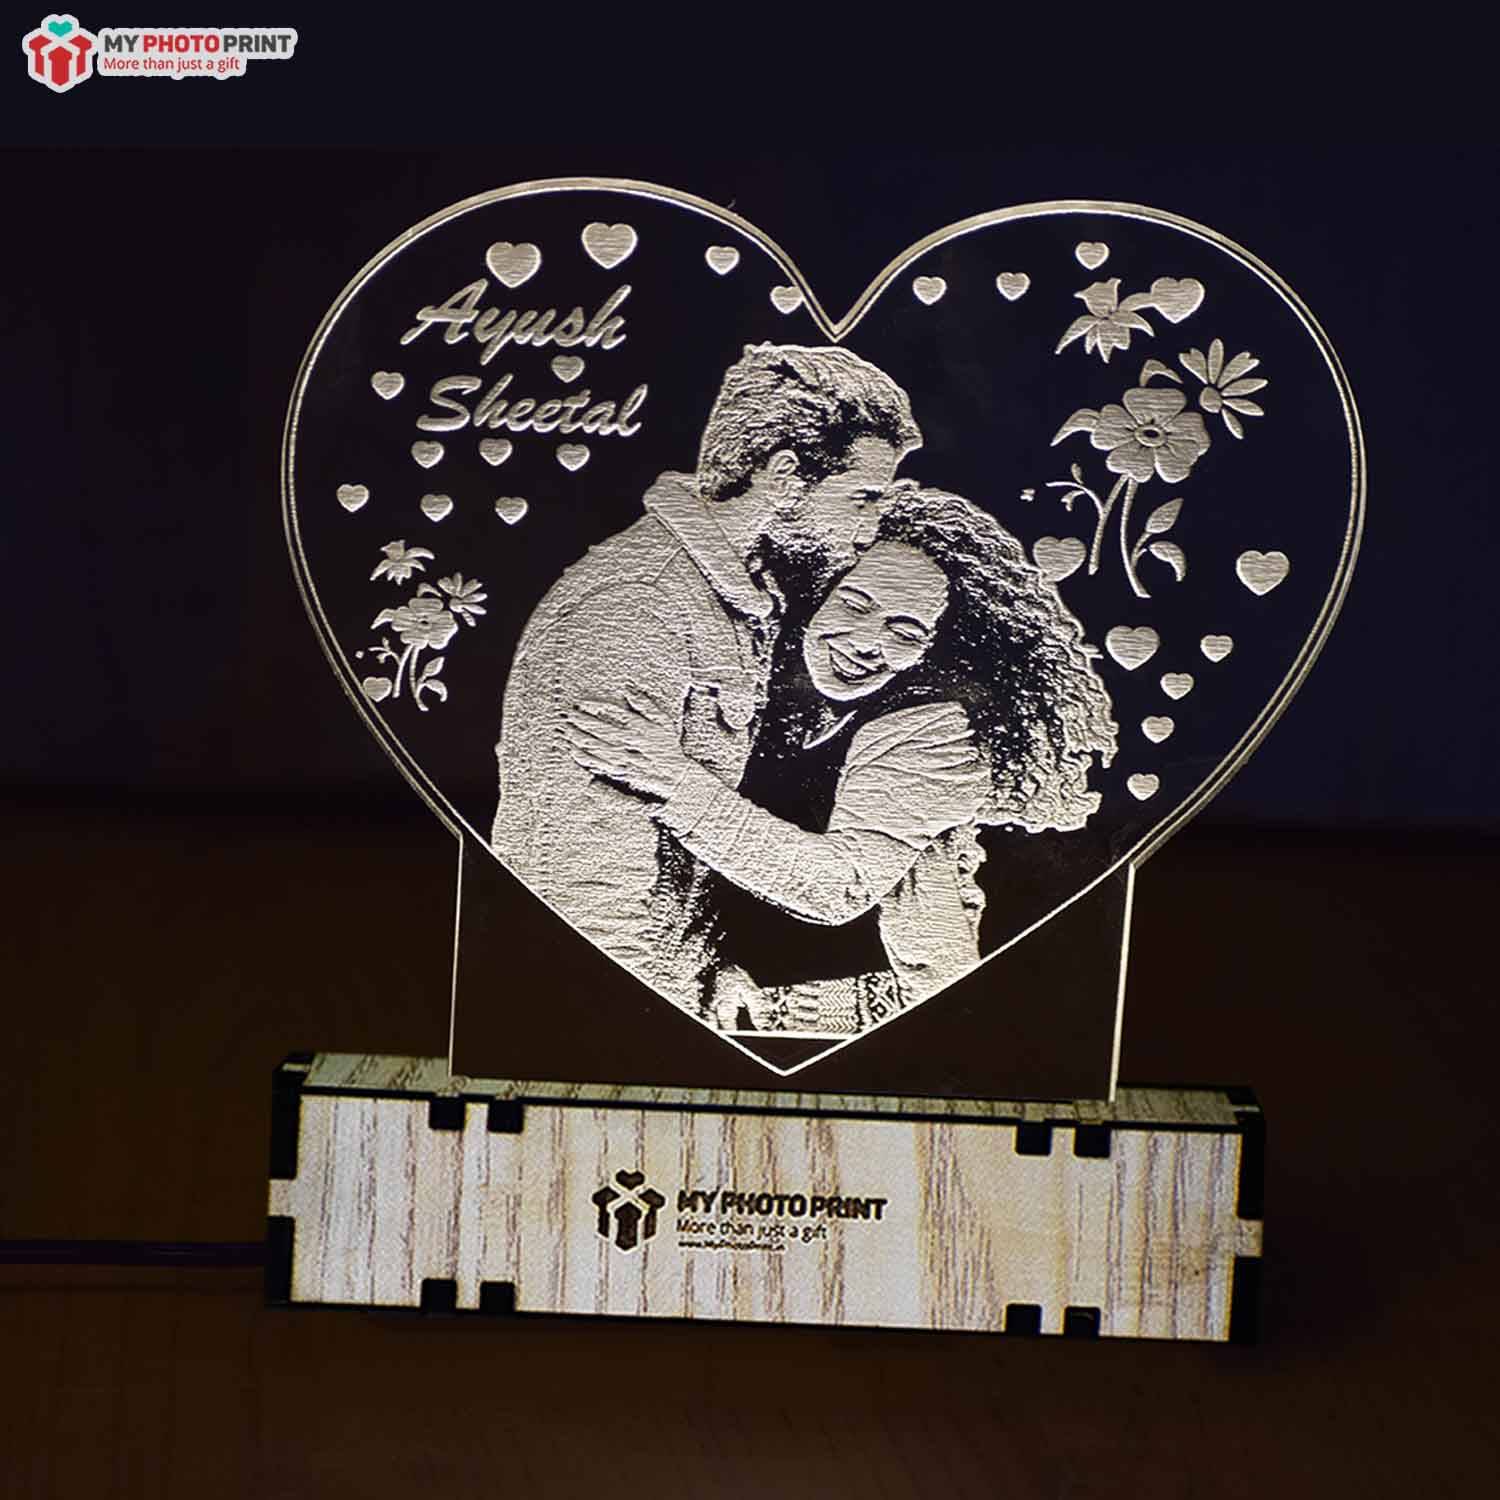 Personalized Heart Shaped Photo Acrylic 3D illusion LED Lamp with Color Changing Led and Remote#1591 